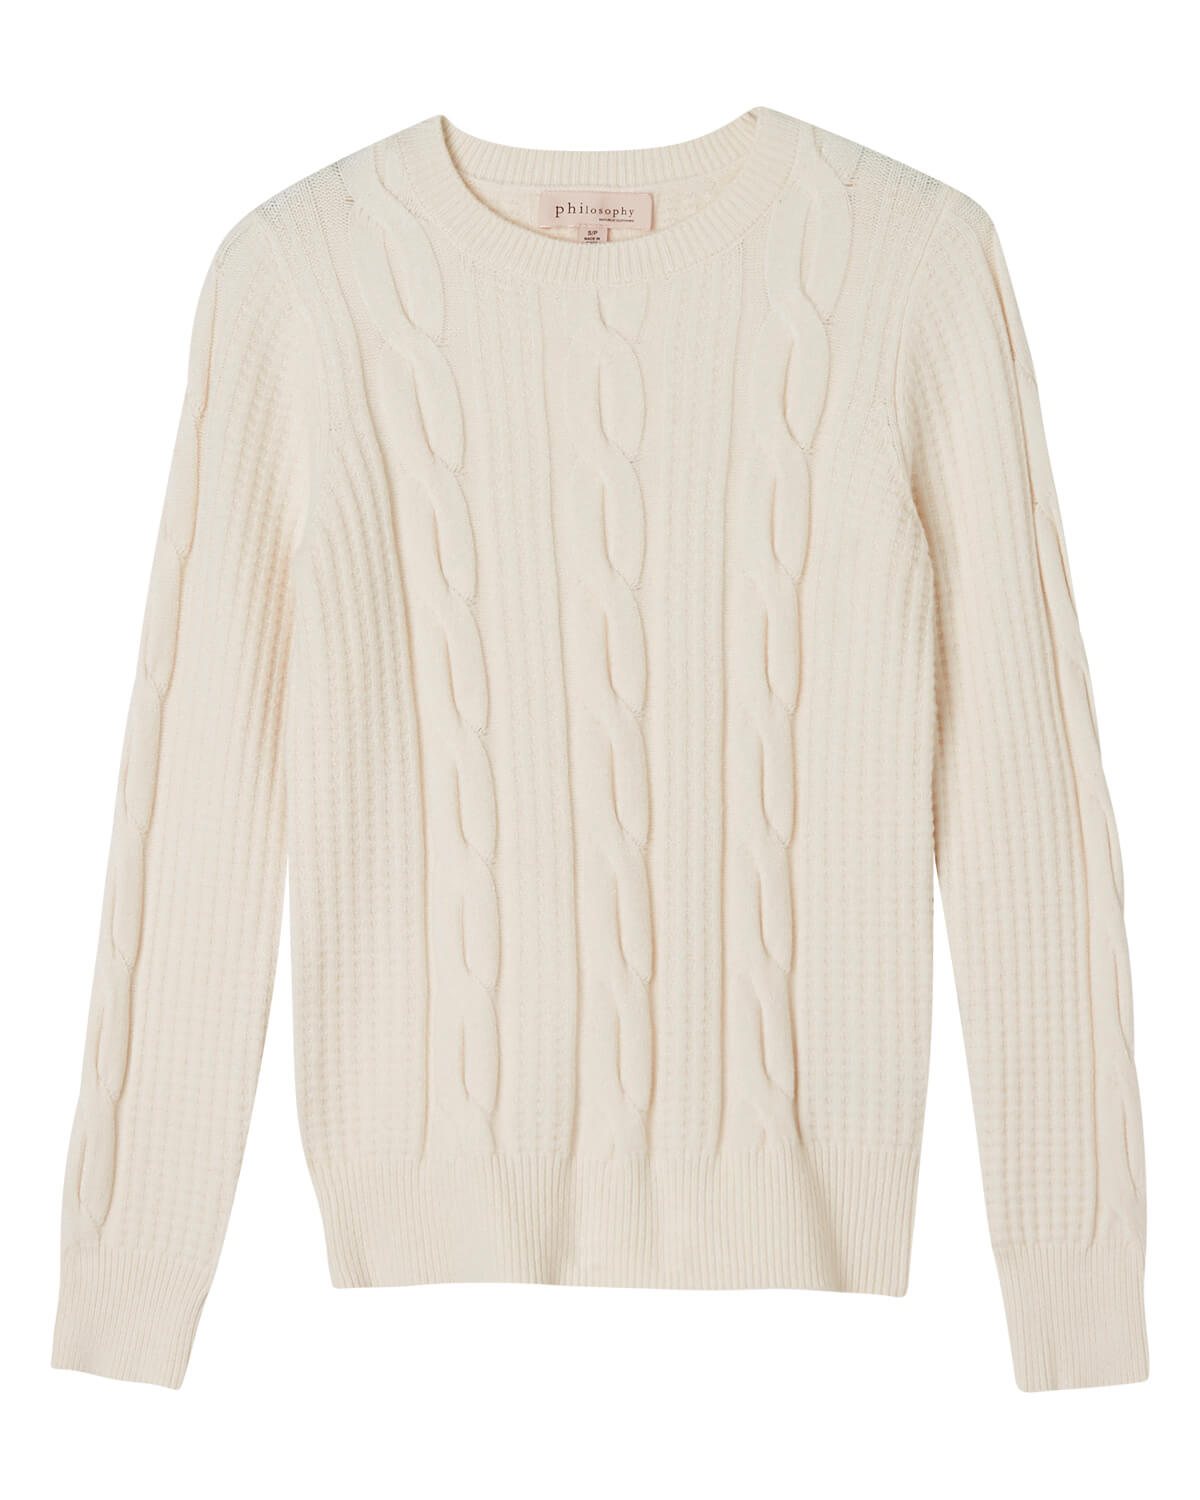 Shop Crew Neck Cable-Knit Pullover | Philosophy | JANE + MERCER